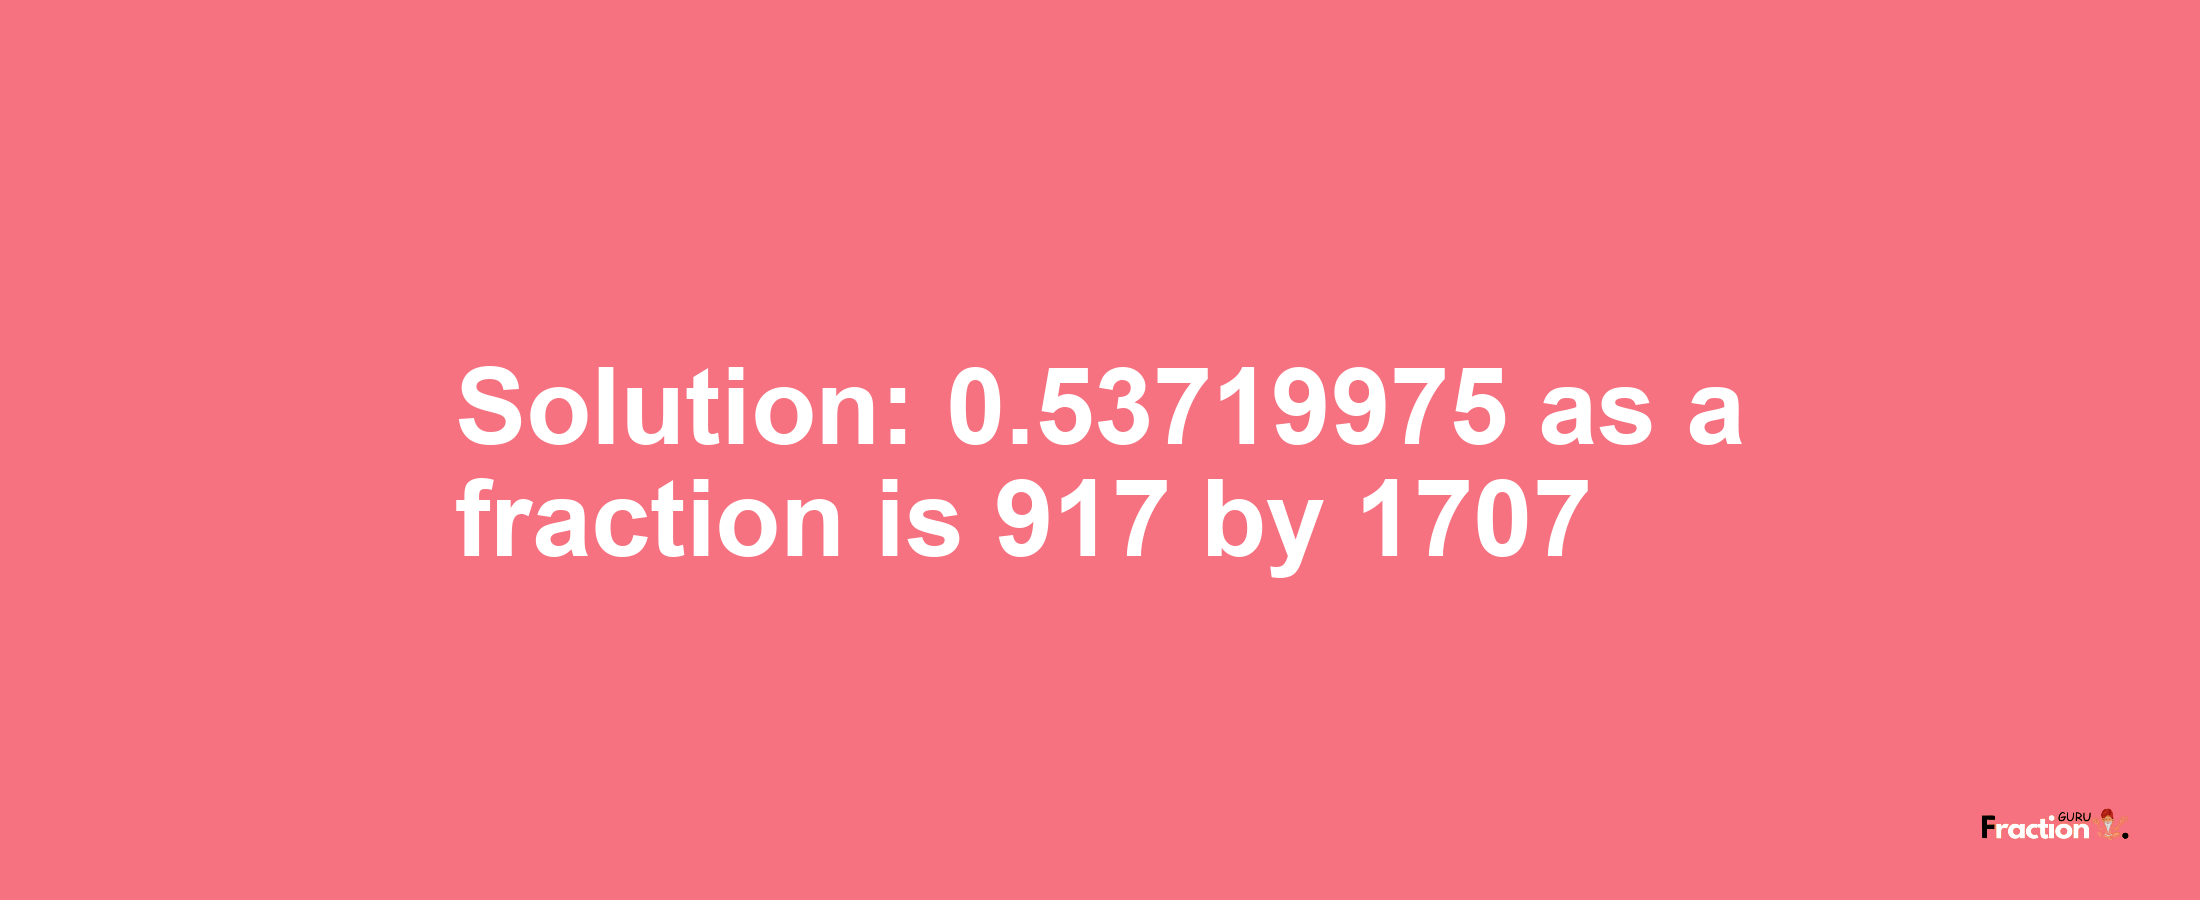 Solution:0.53719975 as a fraction is 917/1707